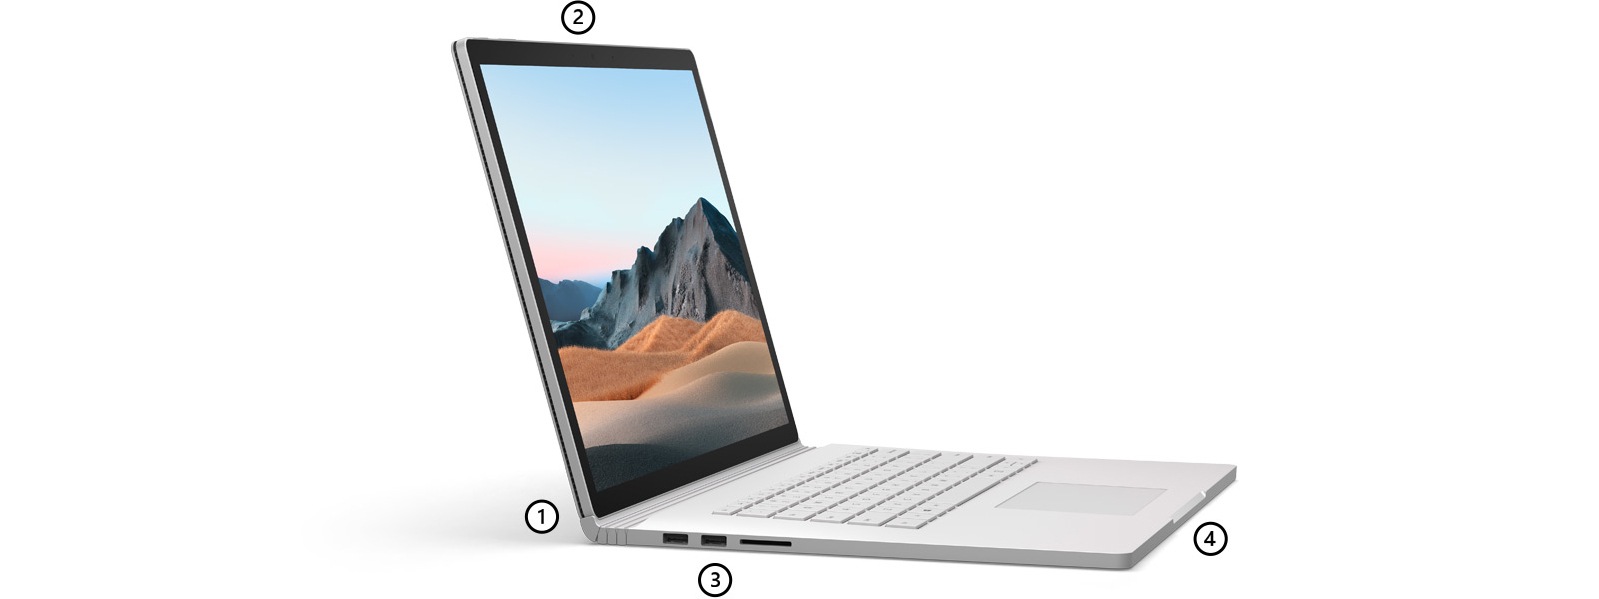 Surface Book 3 seen in profile with points highlighting the dynamic fulcrum hinge, microphones, ports, and the keyboard